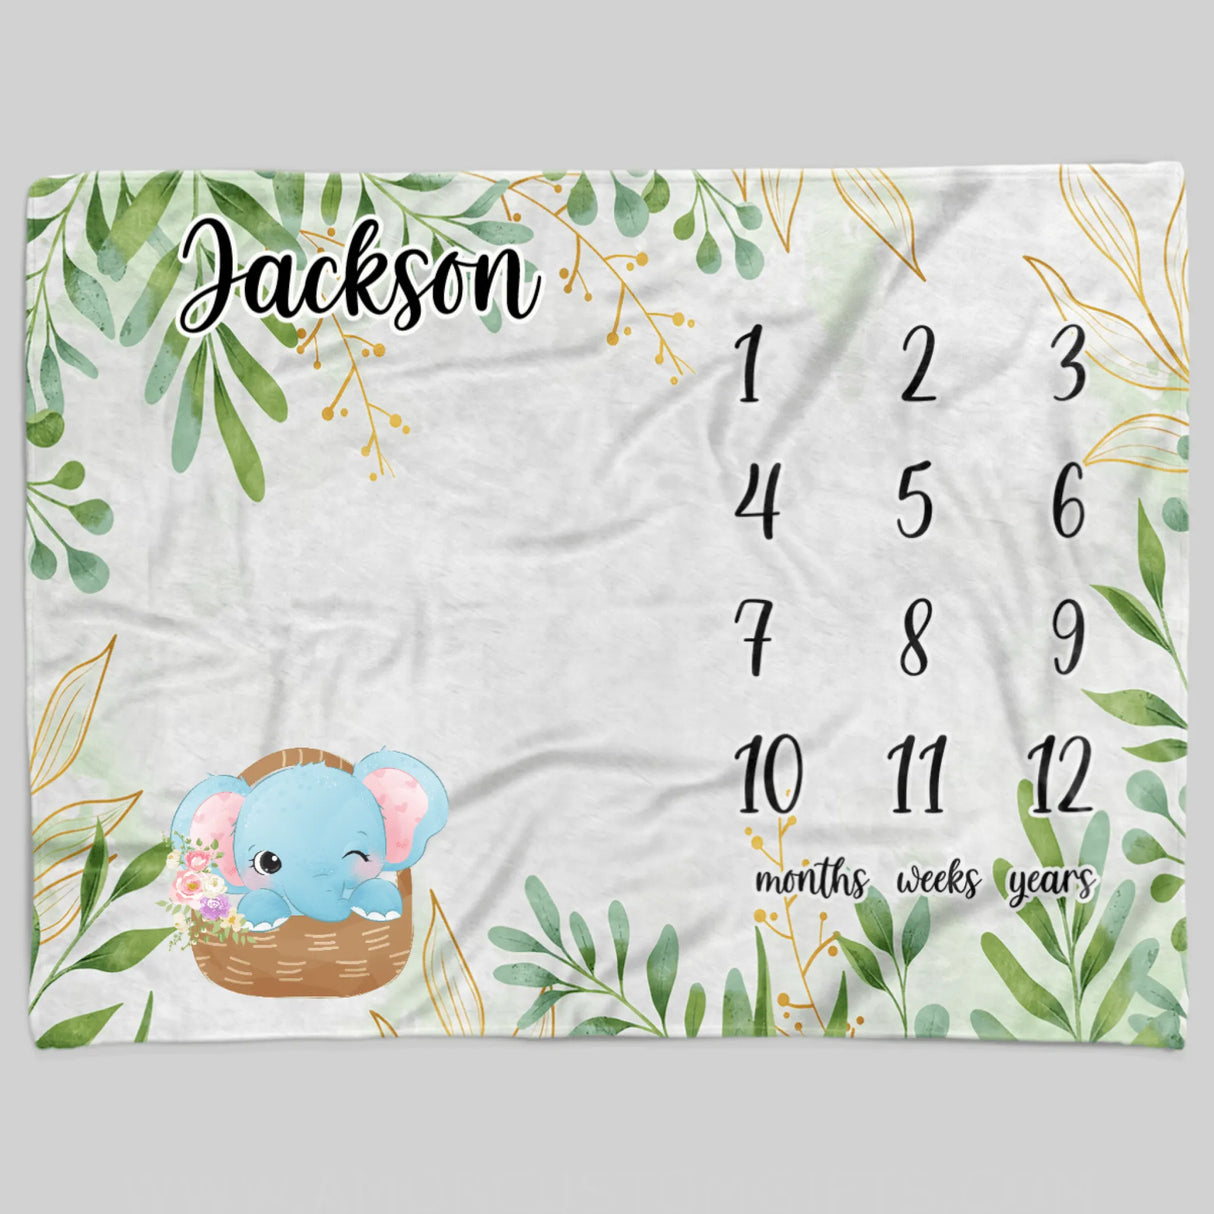 Blankets USA MADE Personalized Baby Blankets, Milestone Blanket For Baby, Elephant, Pig, Lion Throw Blanket, Monogram Blanket for Boy and Girl